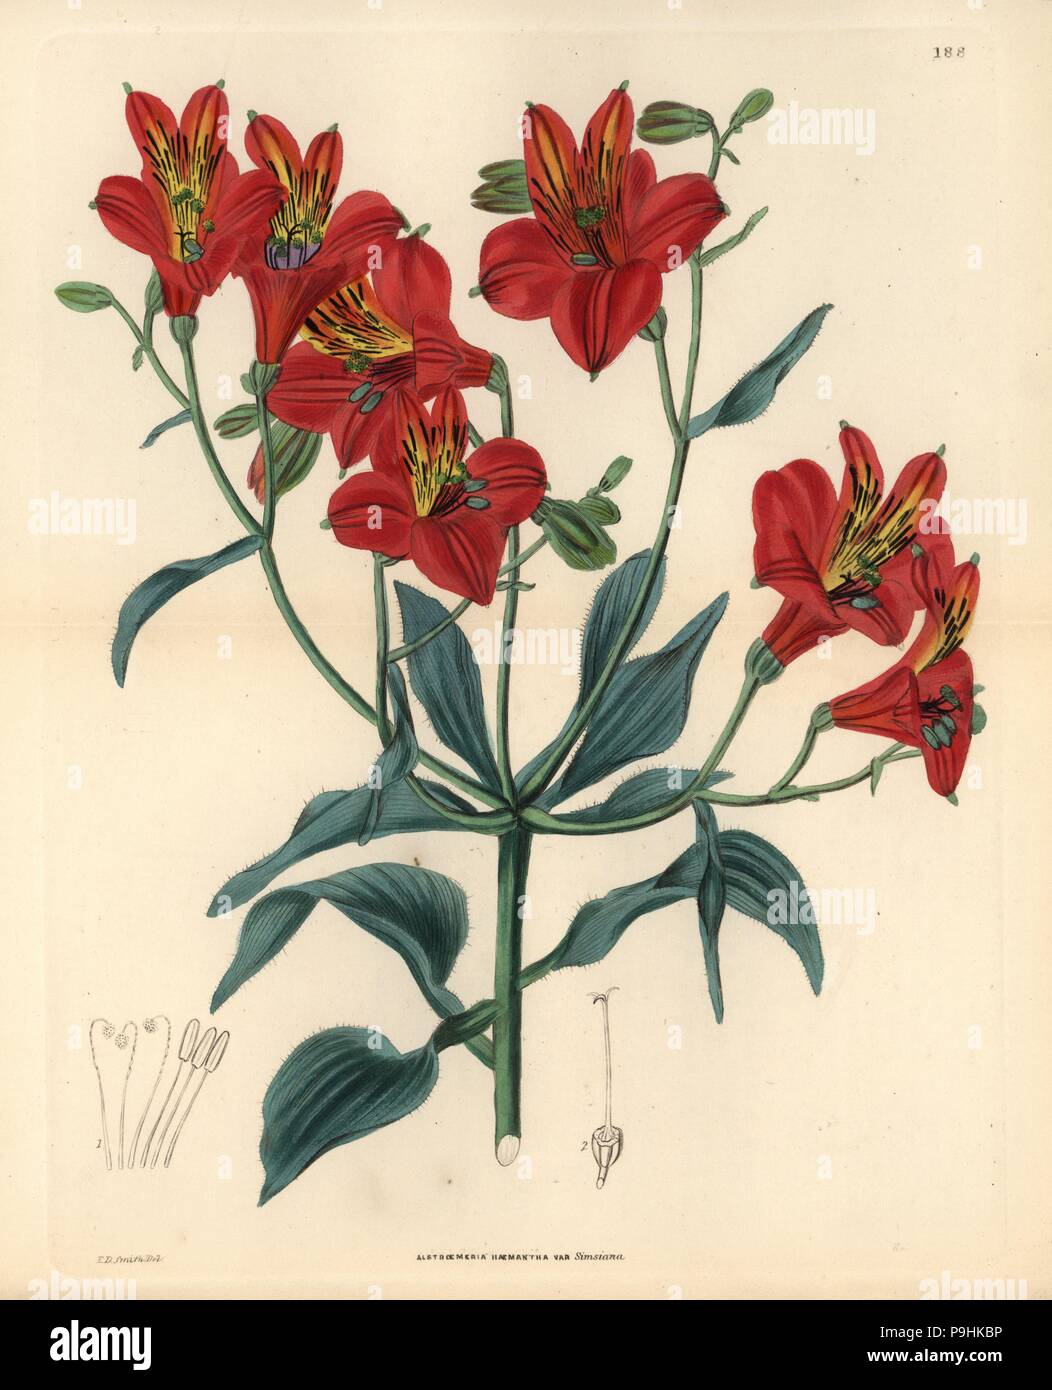 Sims' Peruvian lily, Alstroemeria ligtu subsp. simsii (Sims' crimson alstroemeria, Alstroemeria haemantha var. simsiana). Handcoloured copperplate engraving by Weddell after Edwin Dalton Smith from John Lindley and Robert Sweet's Ornamental Flower Garden and Shrubbery, G. Willis, London, 1854. Stock Photo